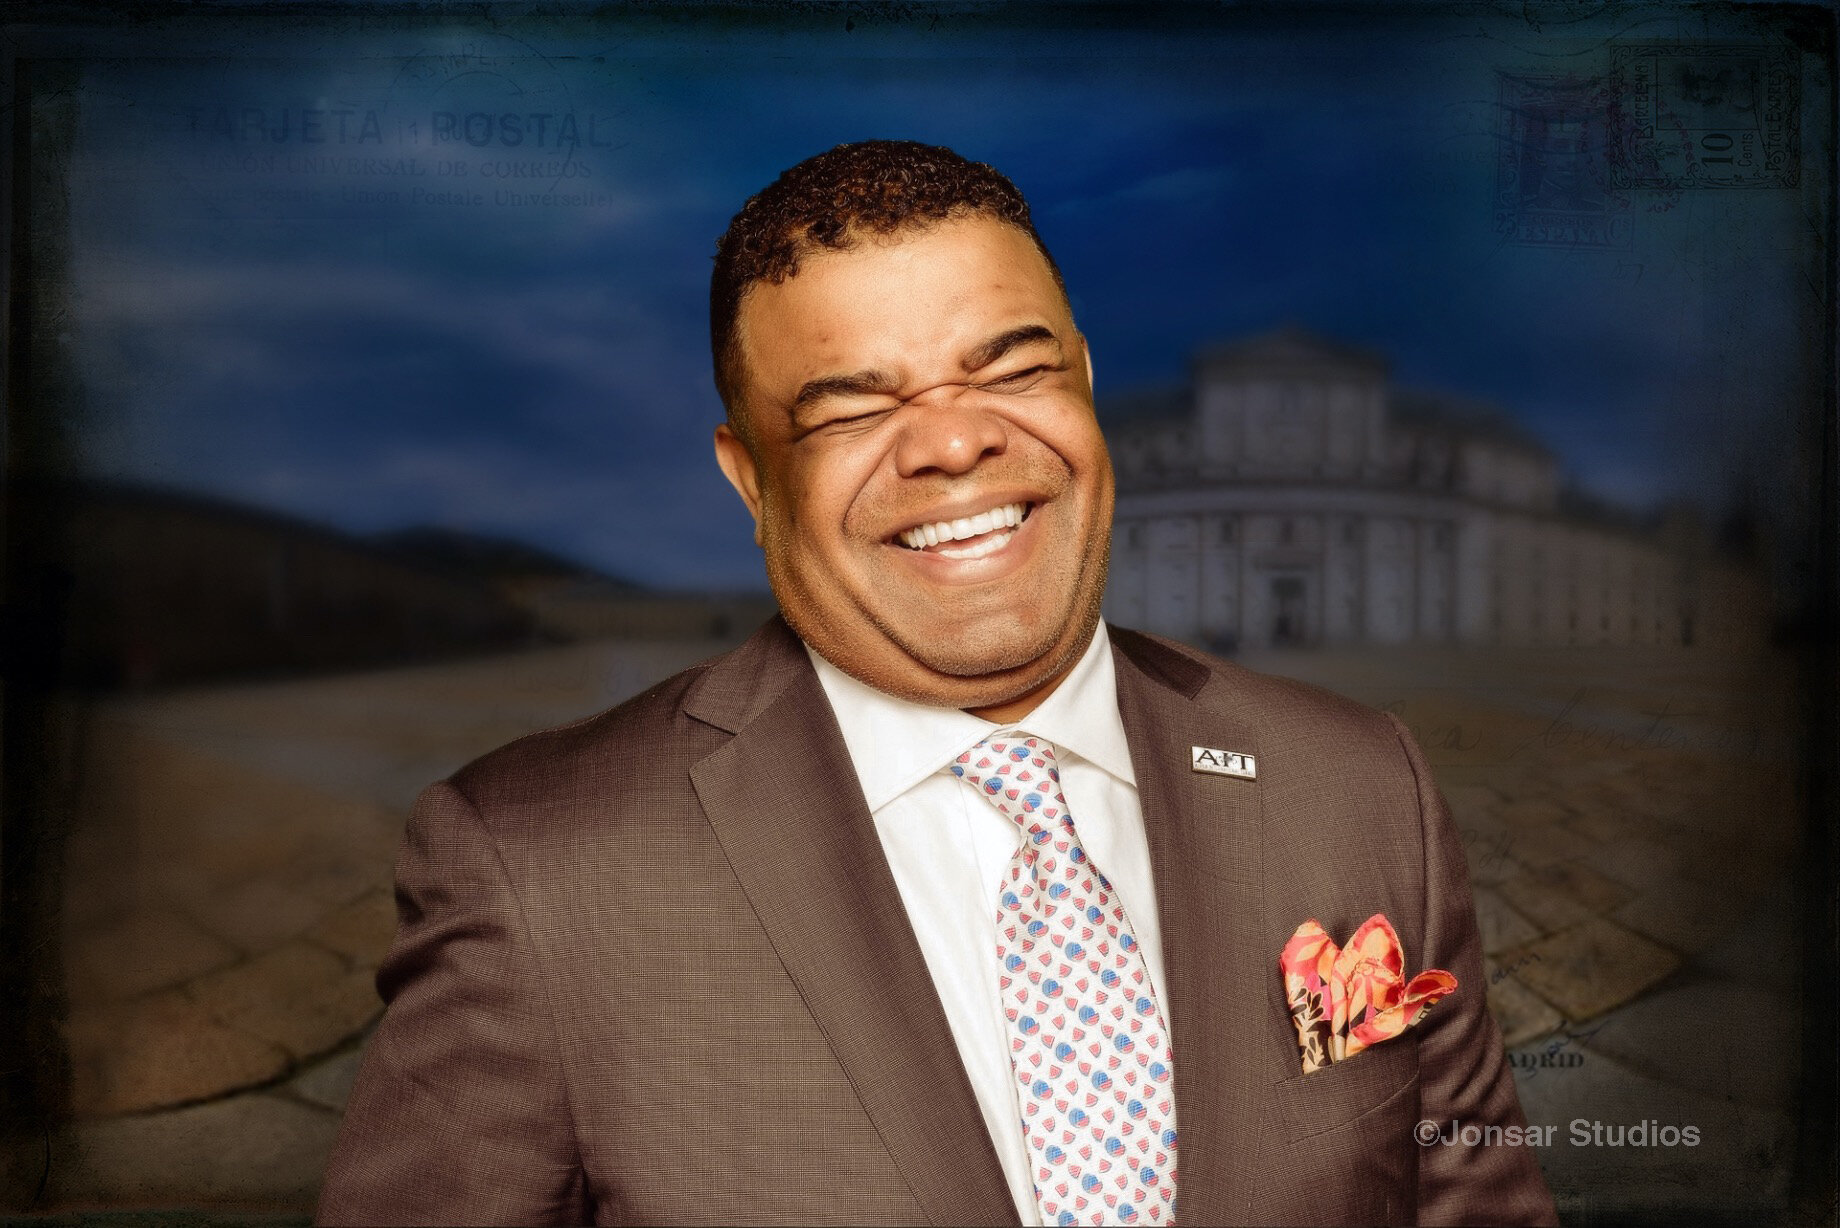 Smiling man in suit on composited background